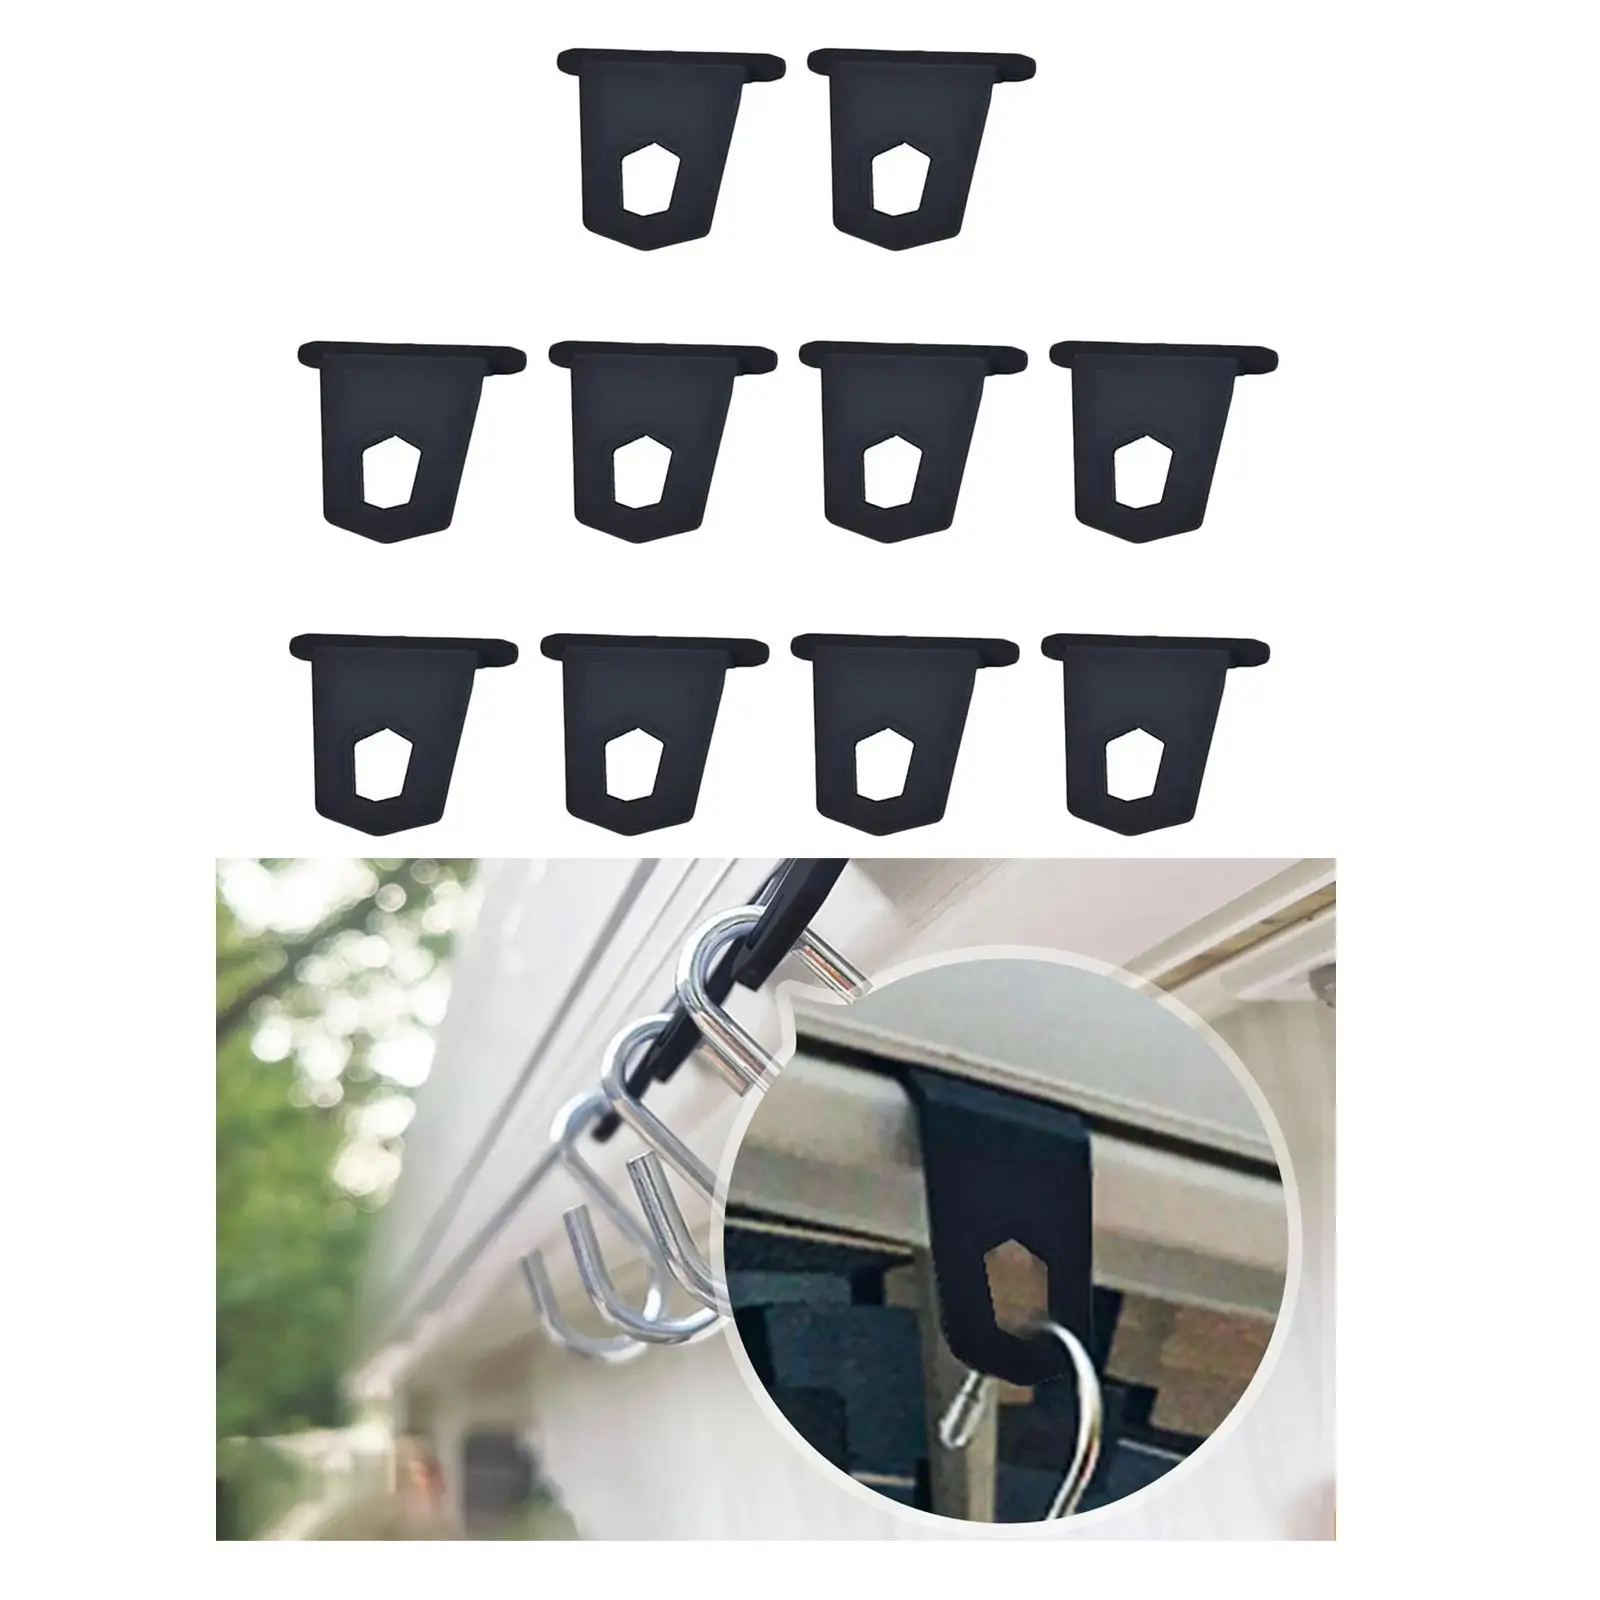 Awning Hangers 10Pcs for Awning Party Light Holders